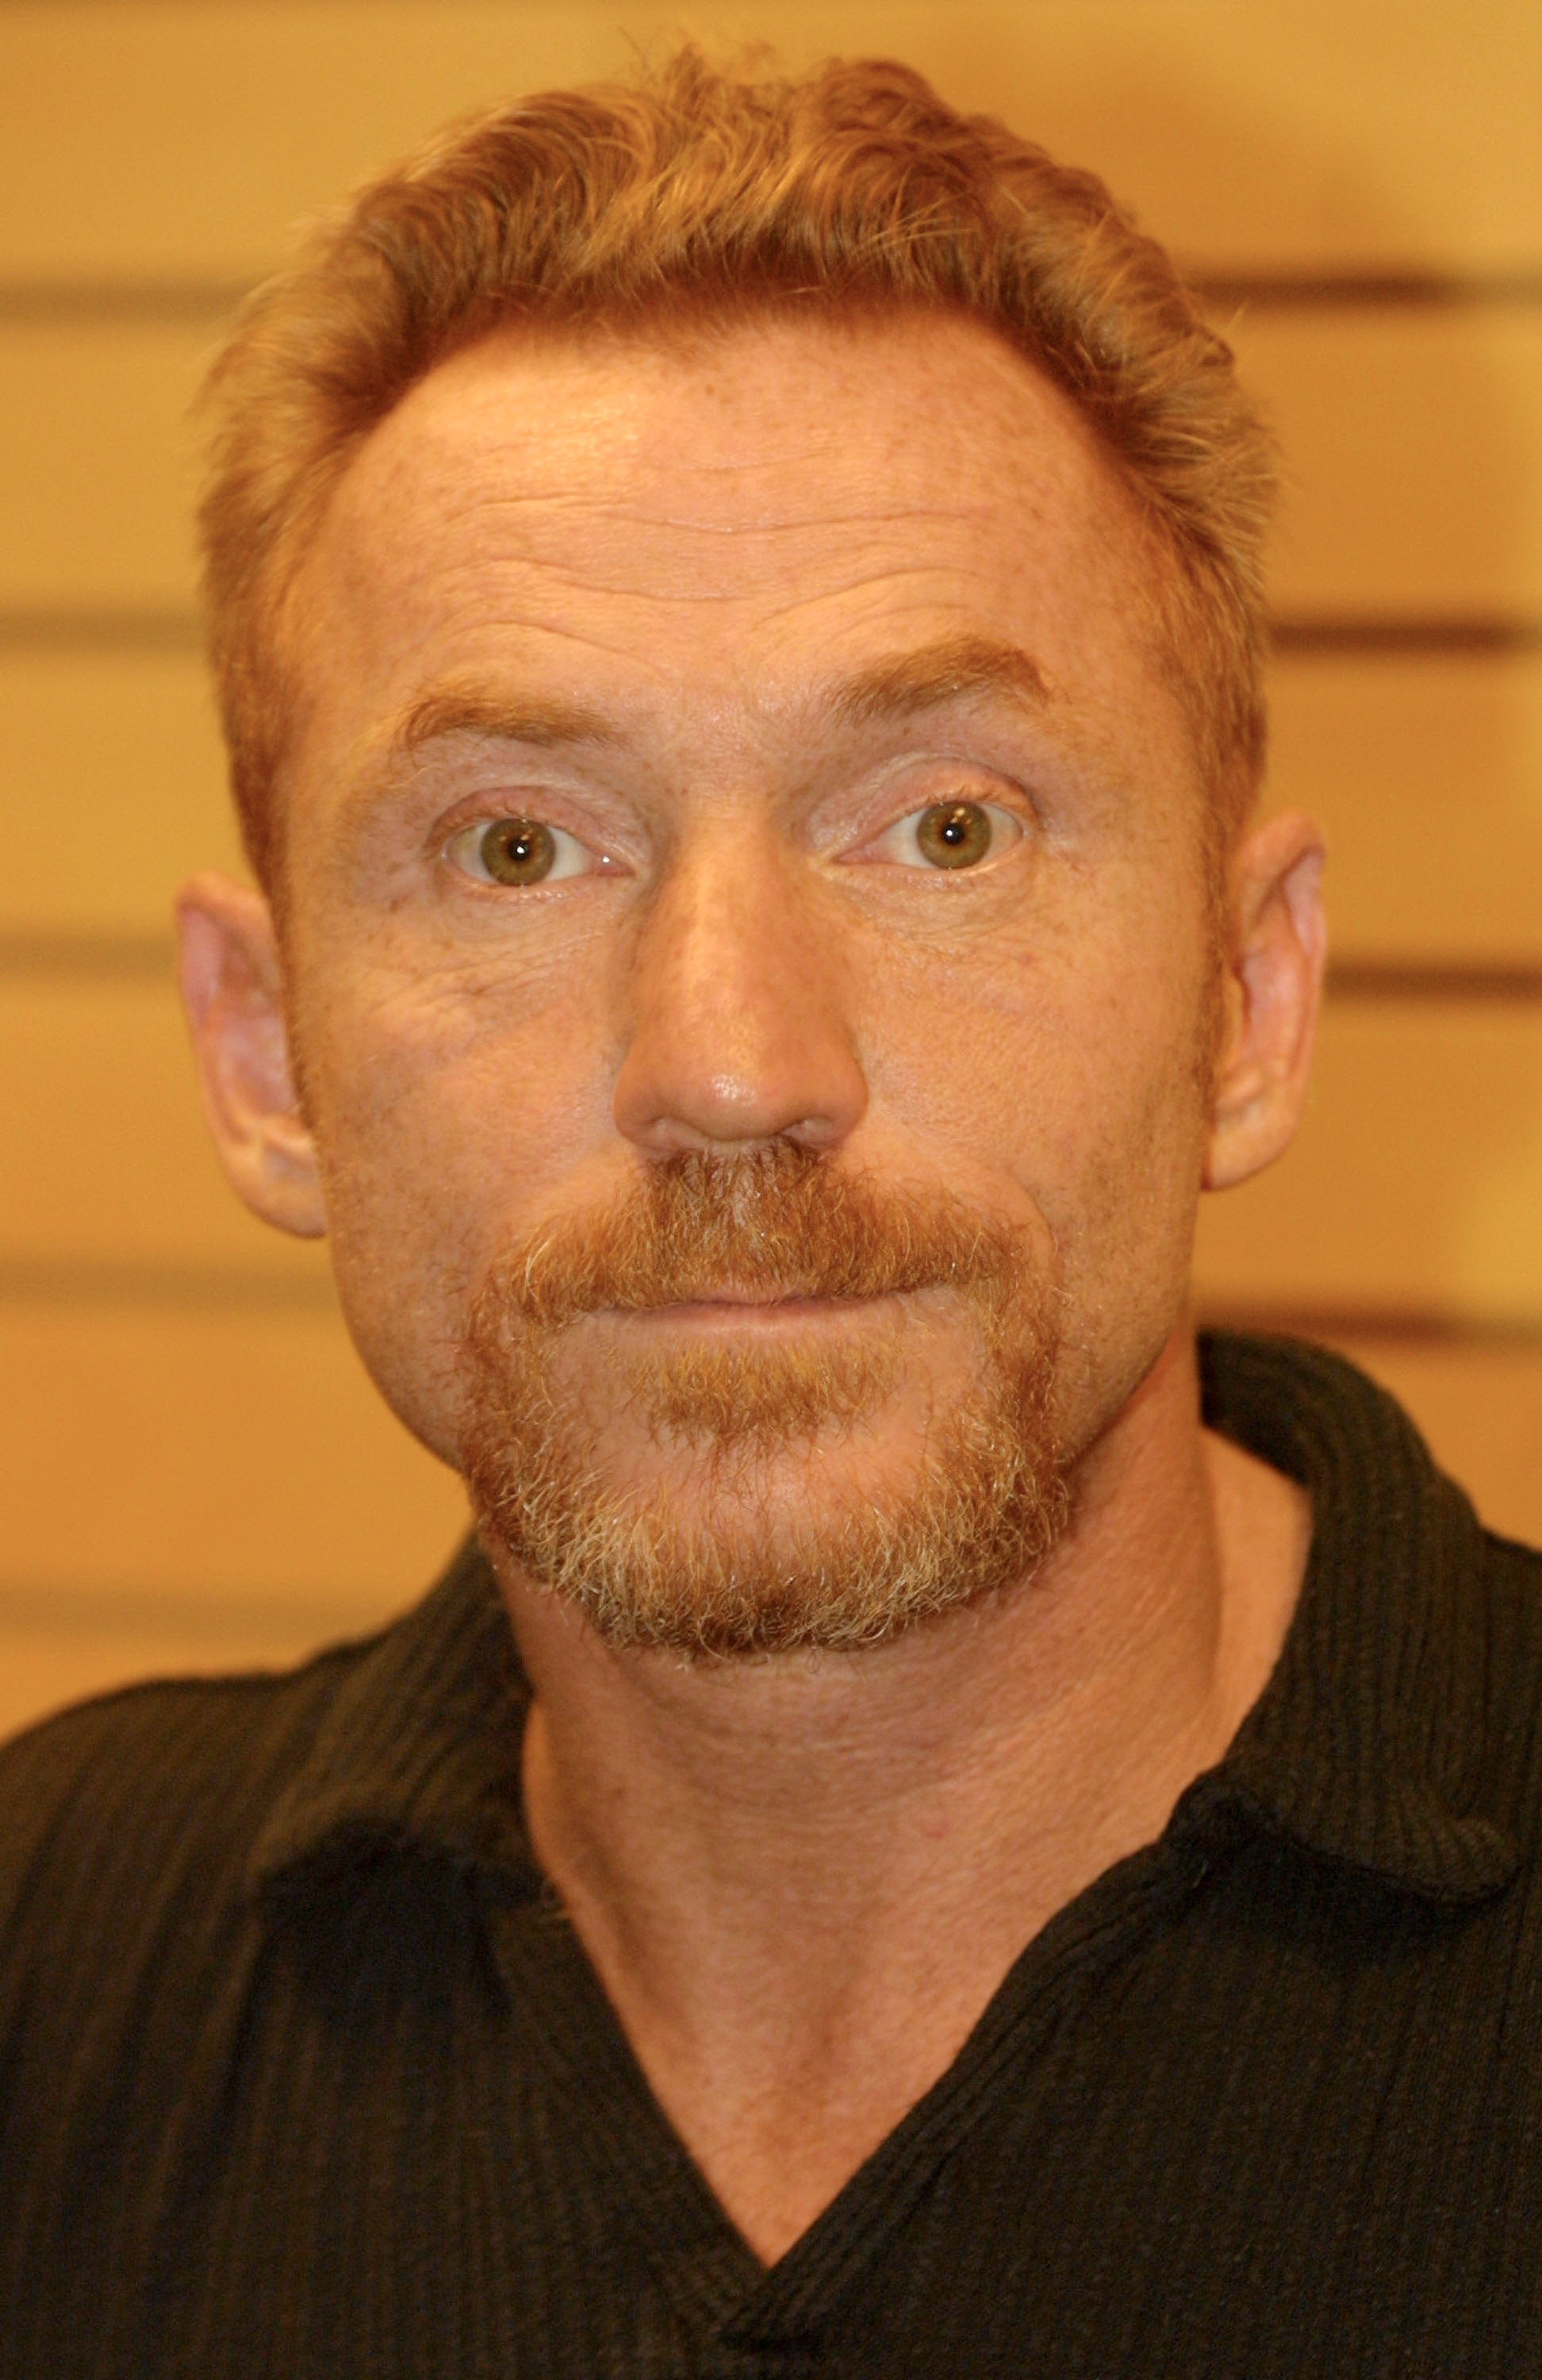 Radio host Danny Bonaduce attends a bookstore appearance for his new memoir "Act of Badness" at Barnes and Noble Books on November 13, 2001 in Los Angeles, California | Source: Getty Images